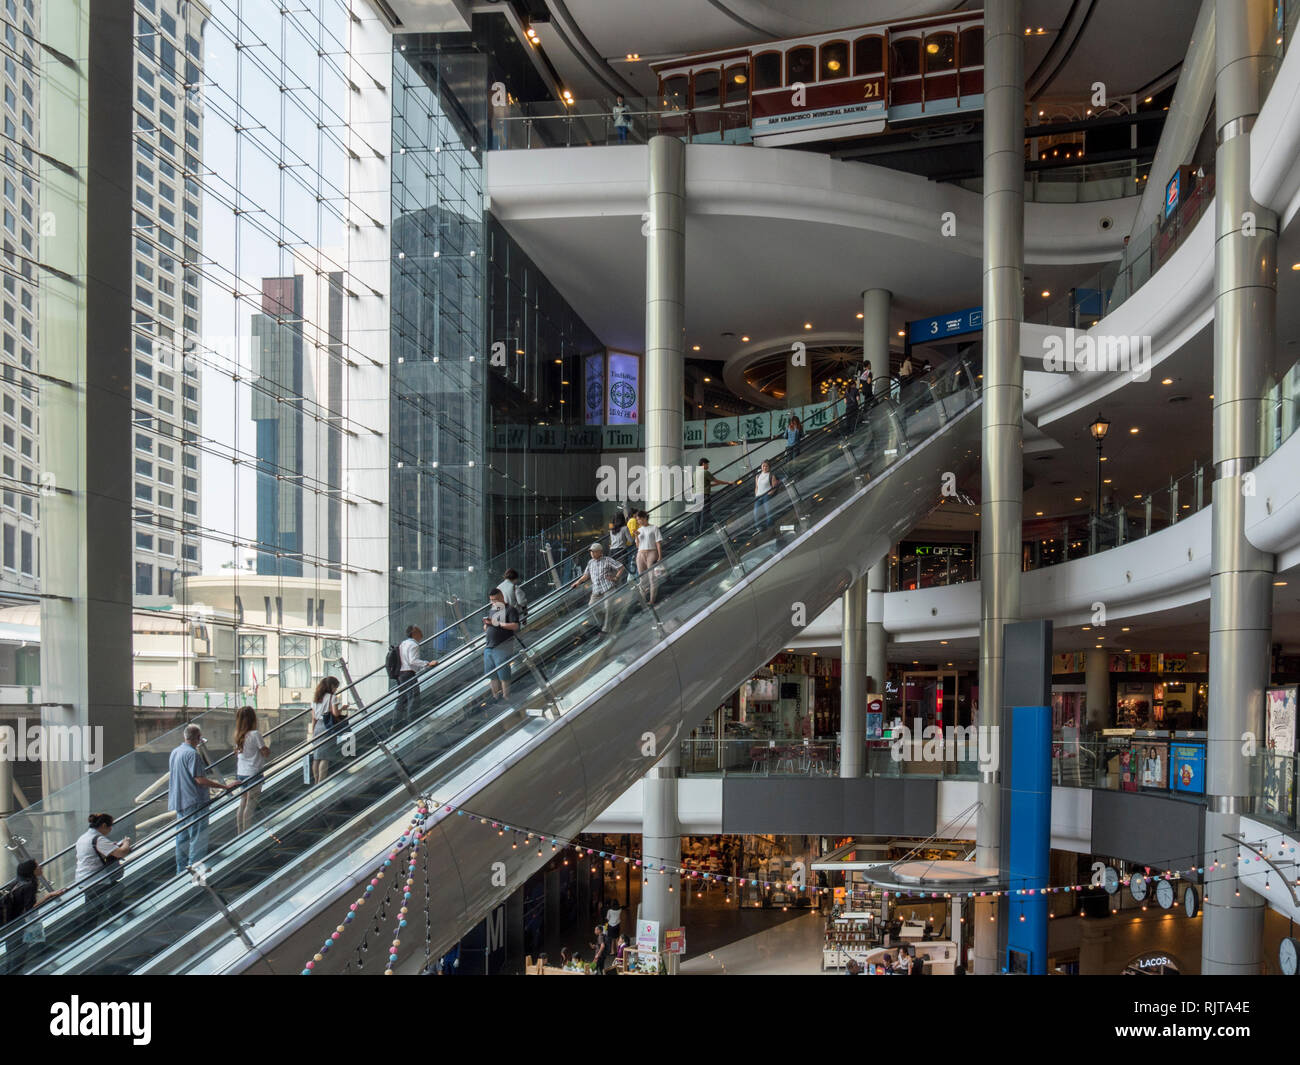 The interior of a modern shopping precinct in Bangkok Thailand with escalators and people shopping Stock Photo